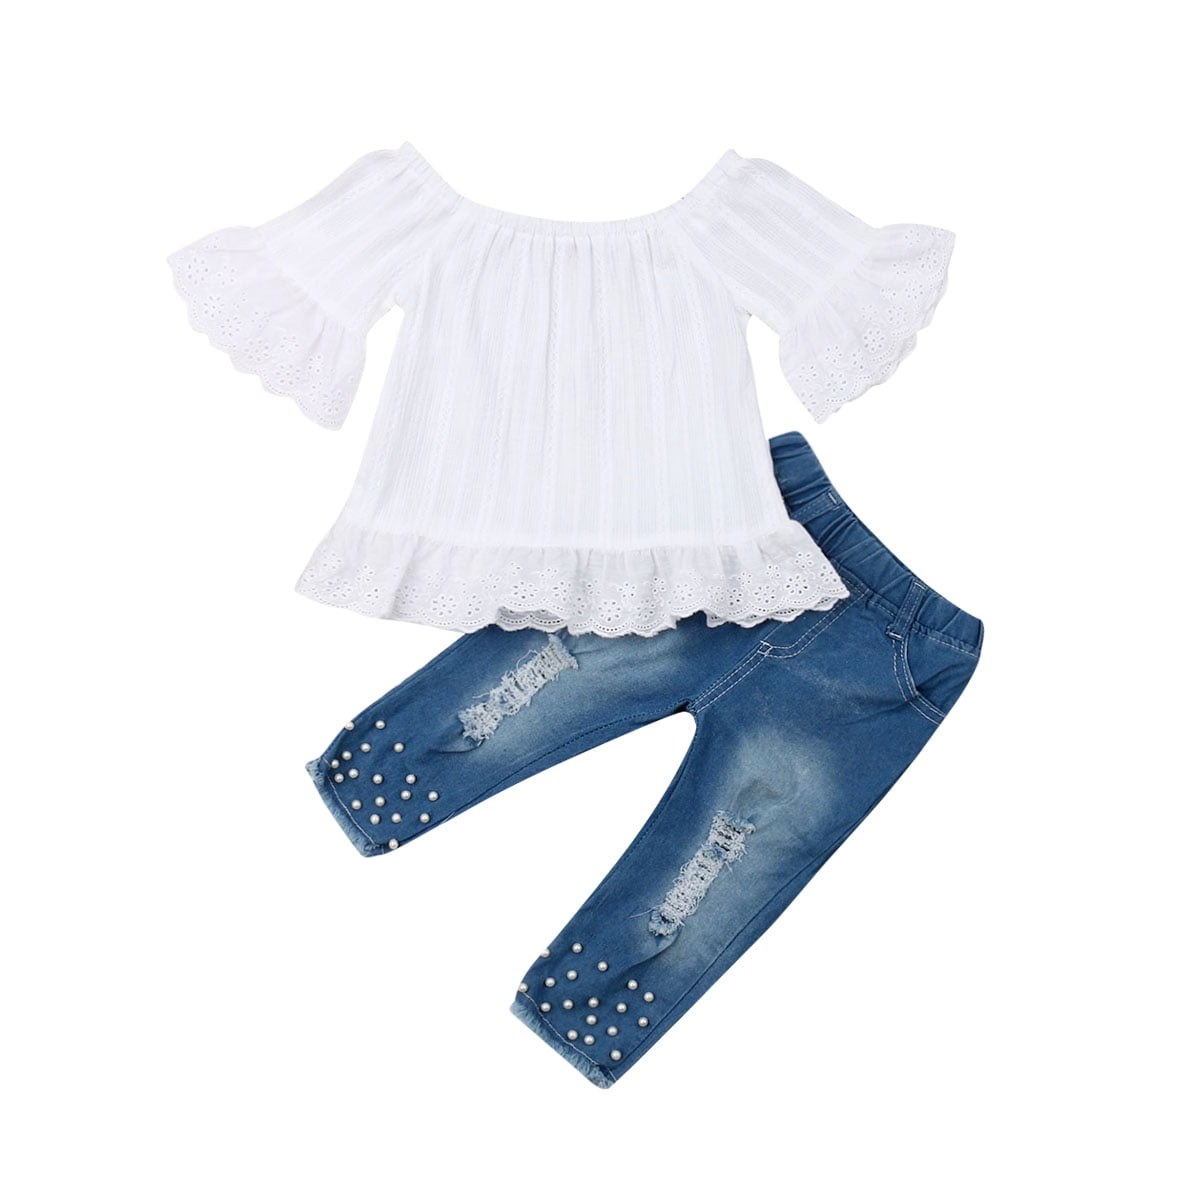 Kids Baby Girl Outfit Off Shoulder Shirt T-shirt Tops+Long Pants Jeans Clothes 